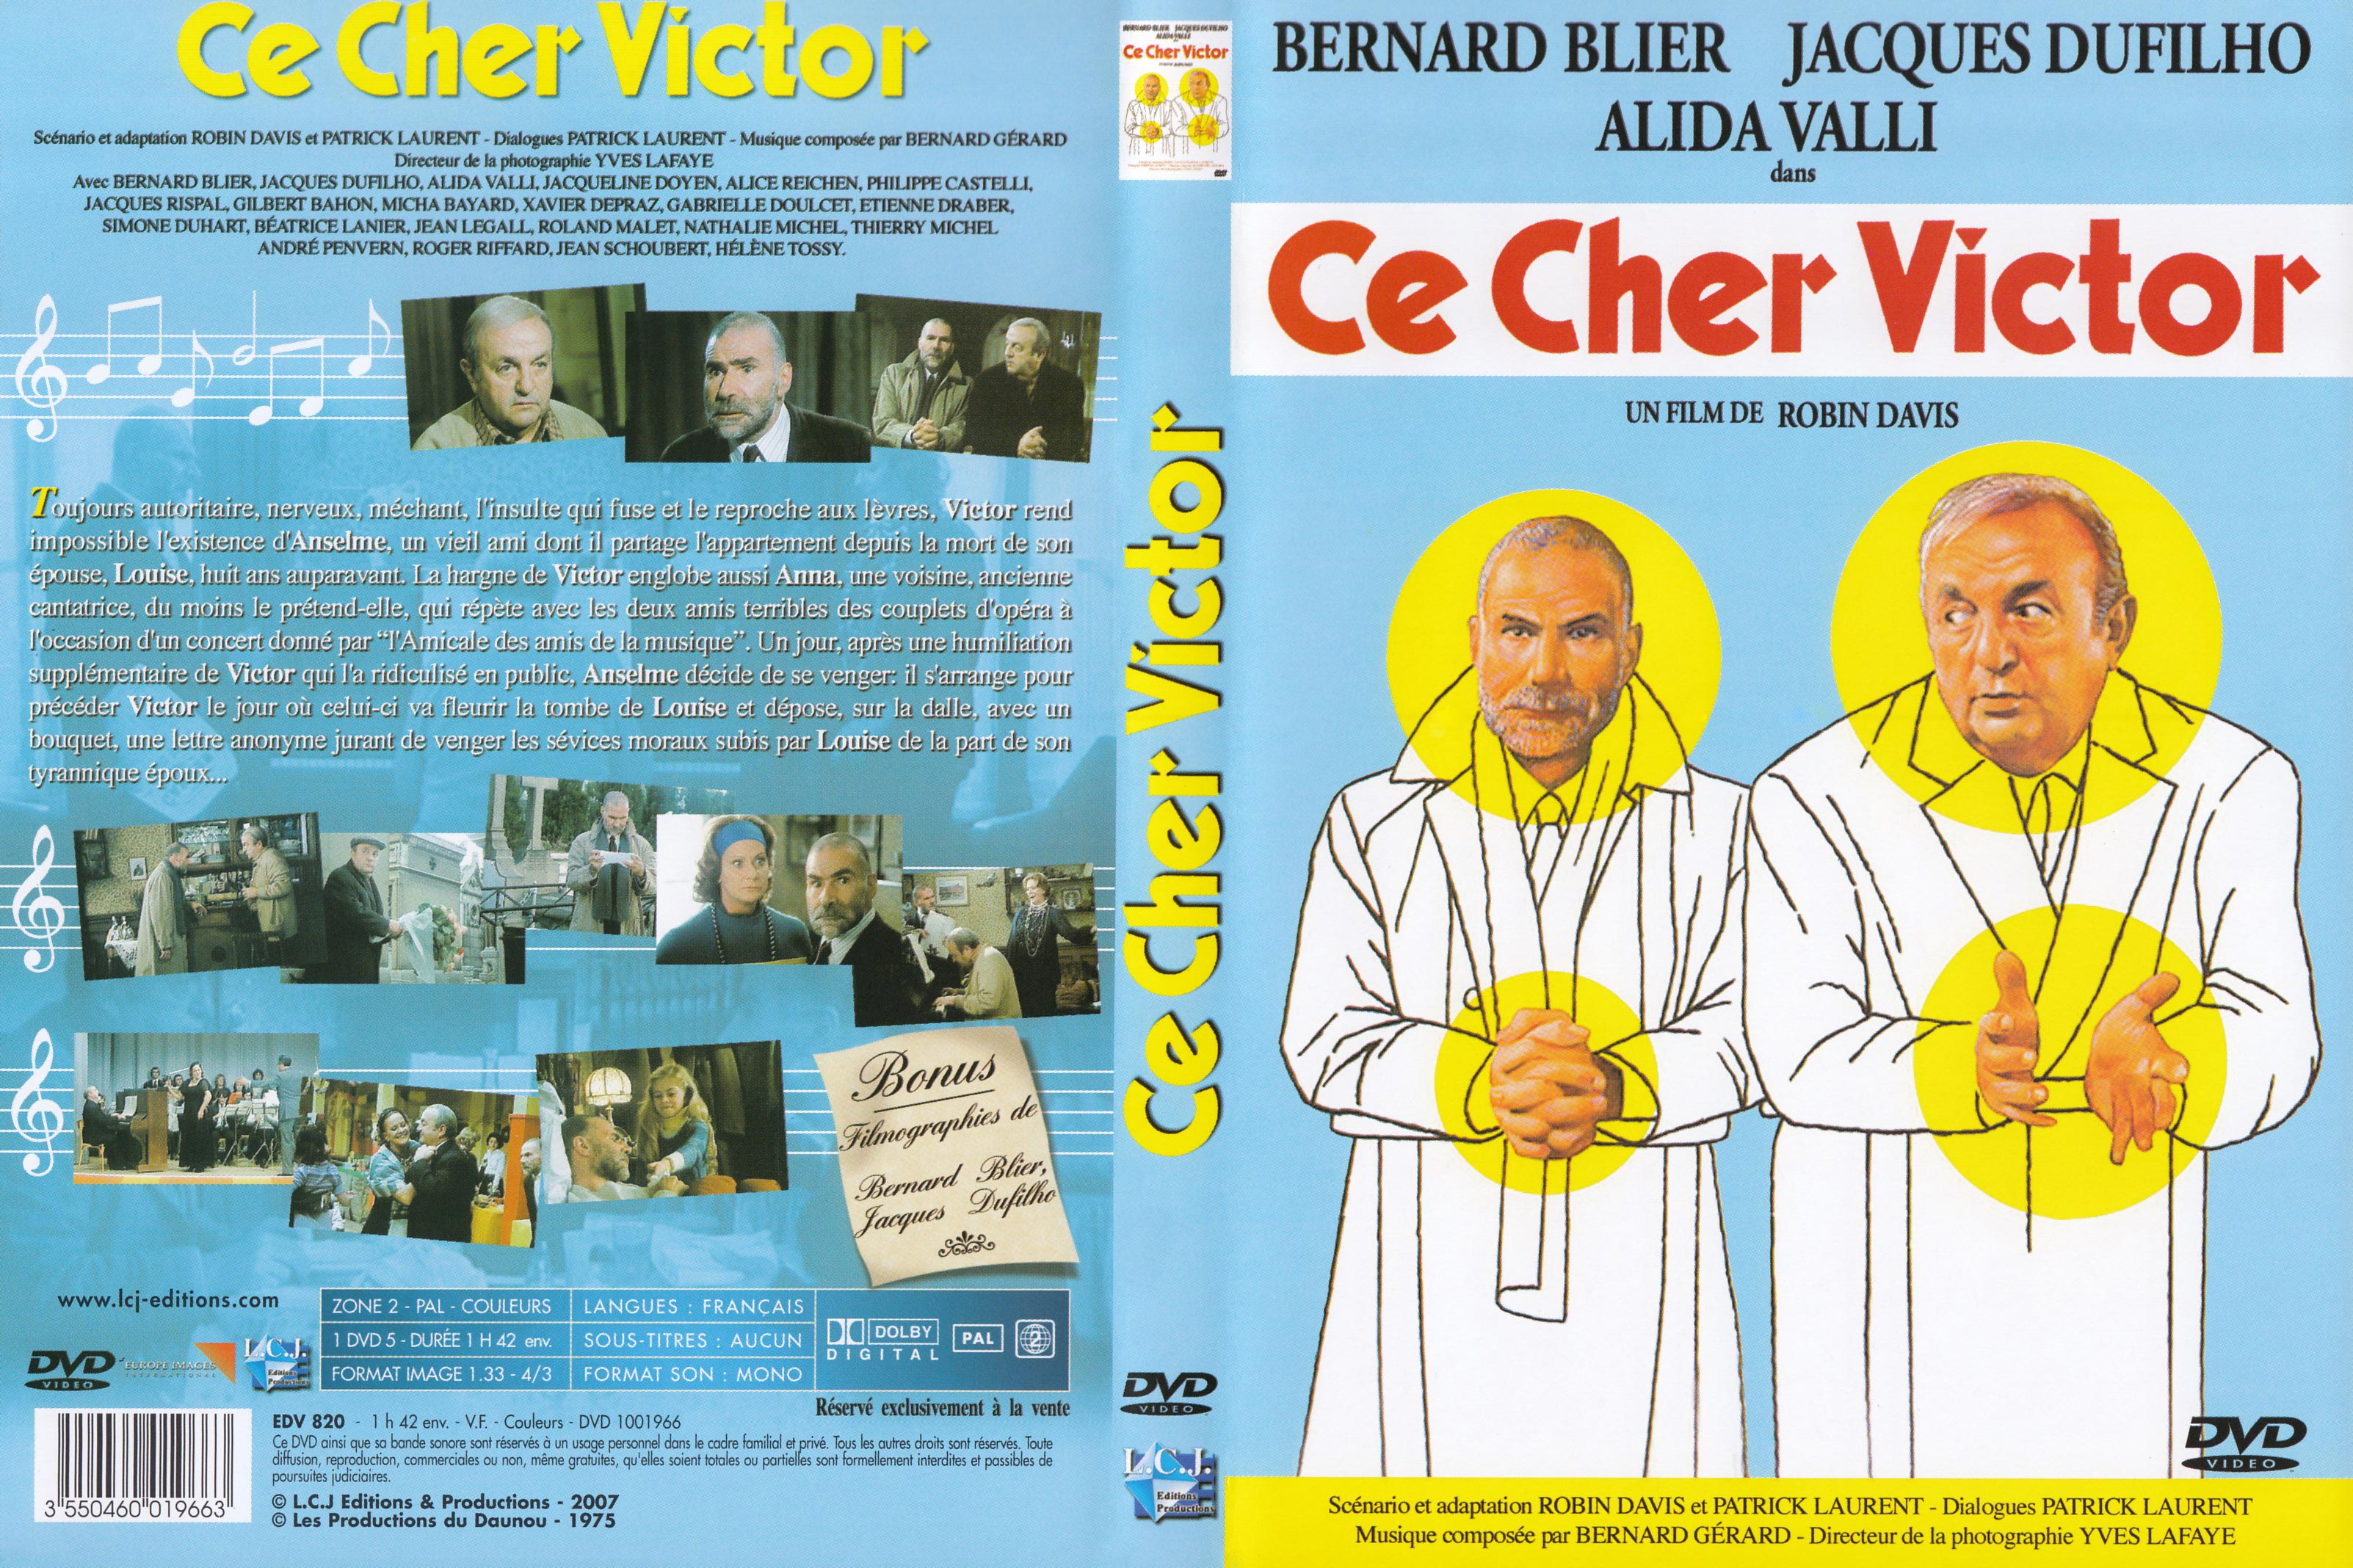 Jaquette DVD Ce cher Victor